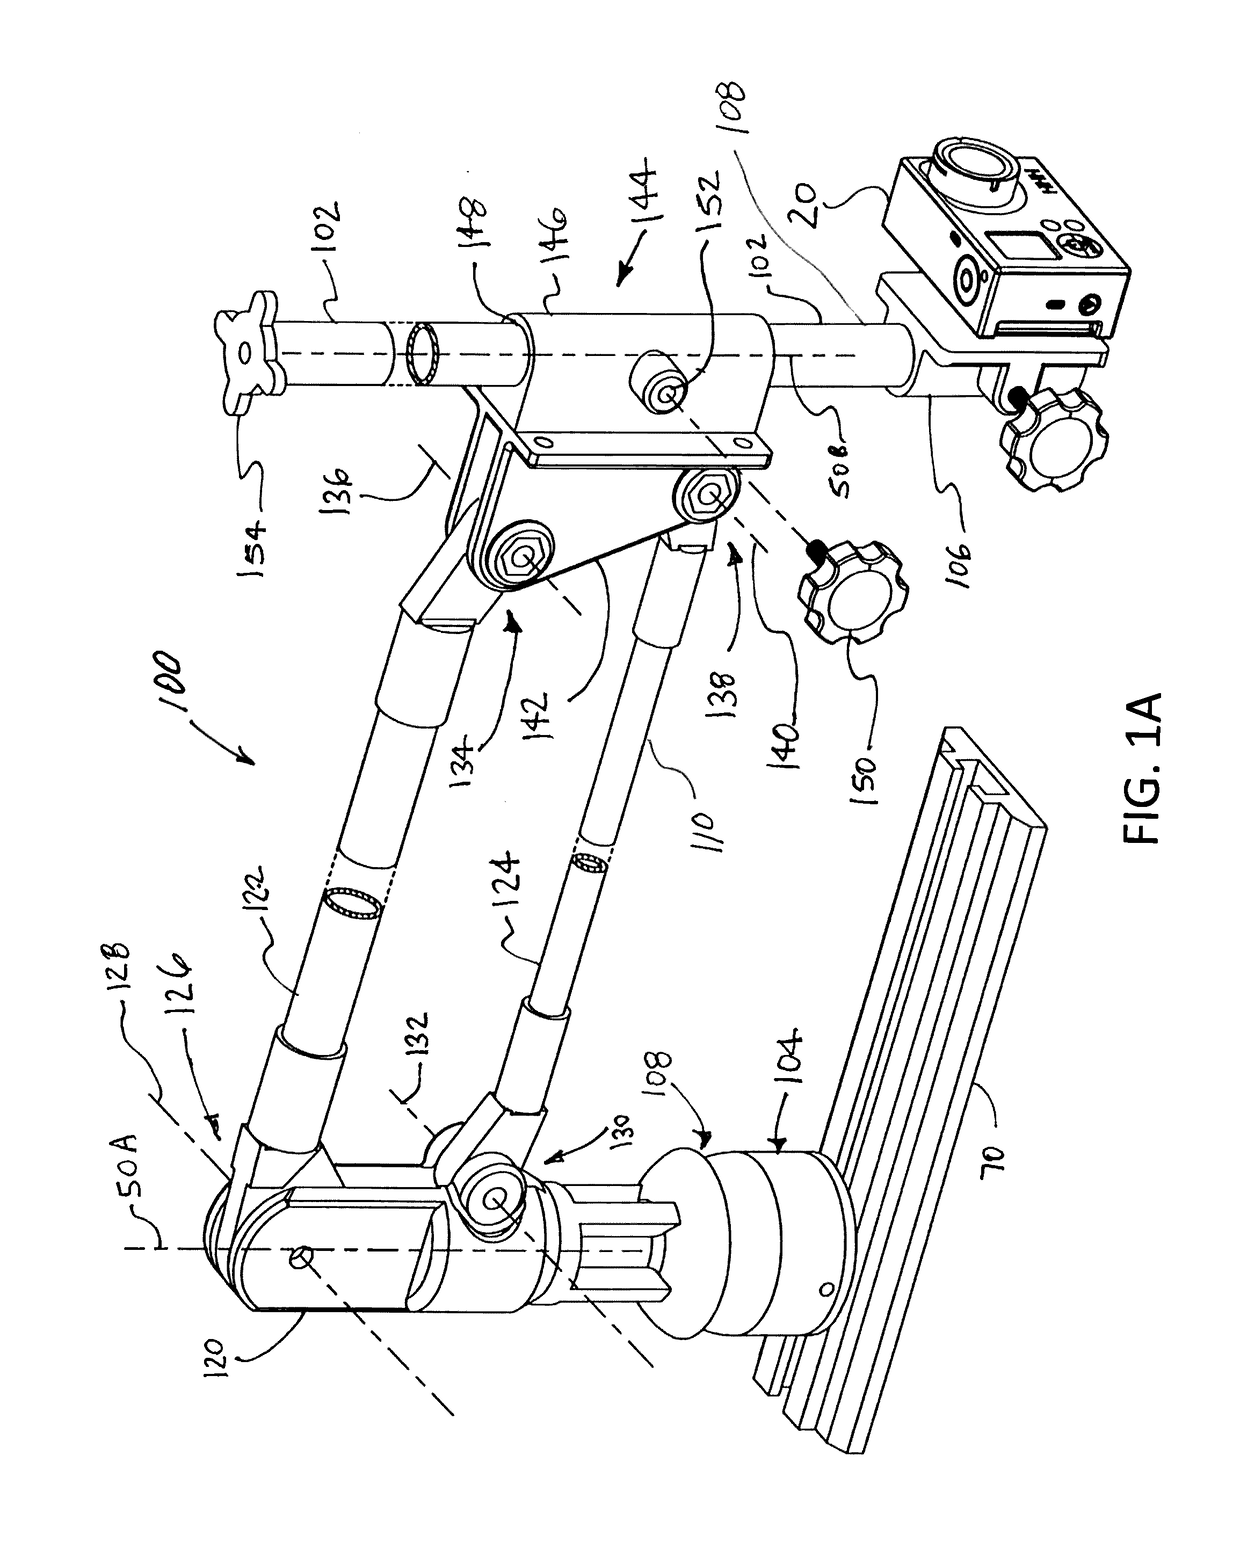 Camera positioning and orienting apparatus